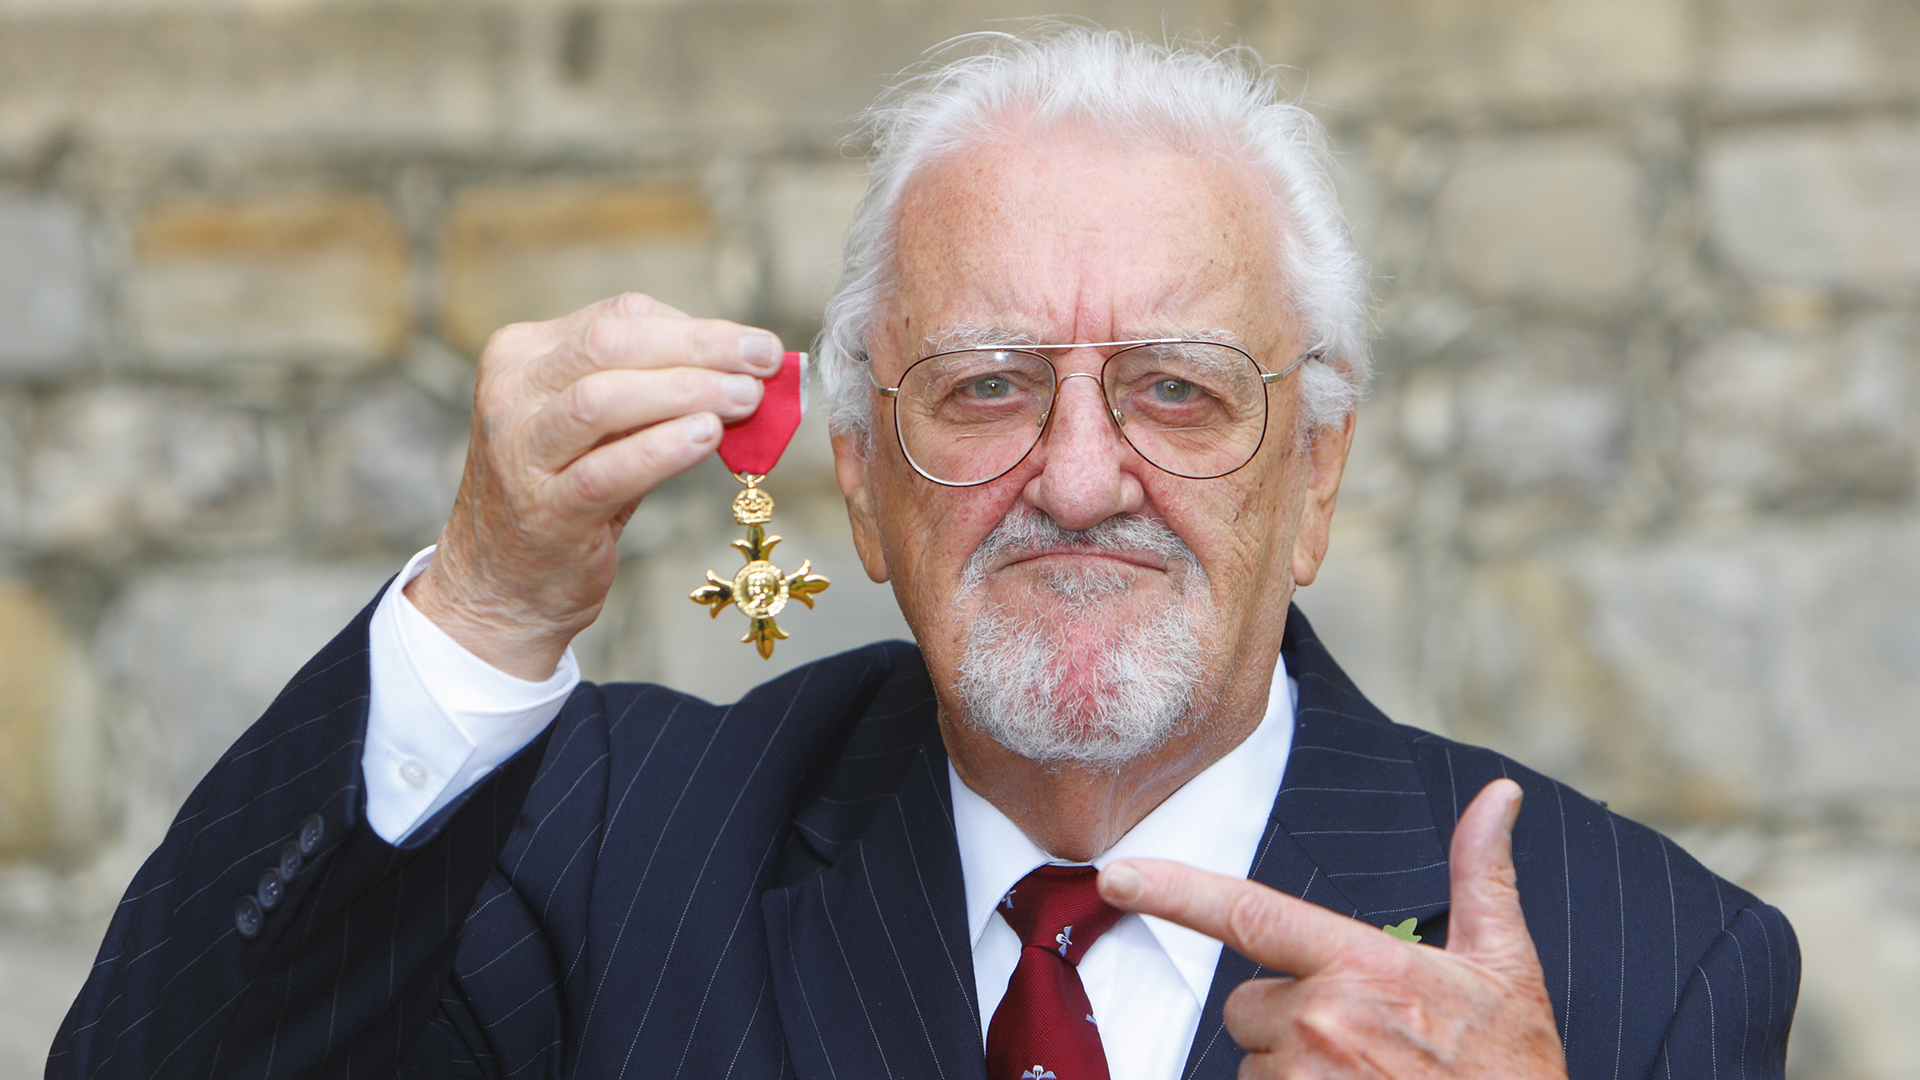 'Doctor Who' and 'The Railway Children' Actor Bernard Cribbins Has Died at Age 93